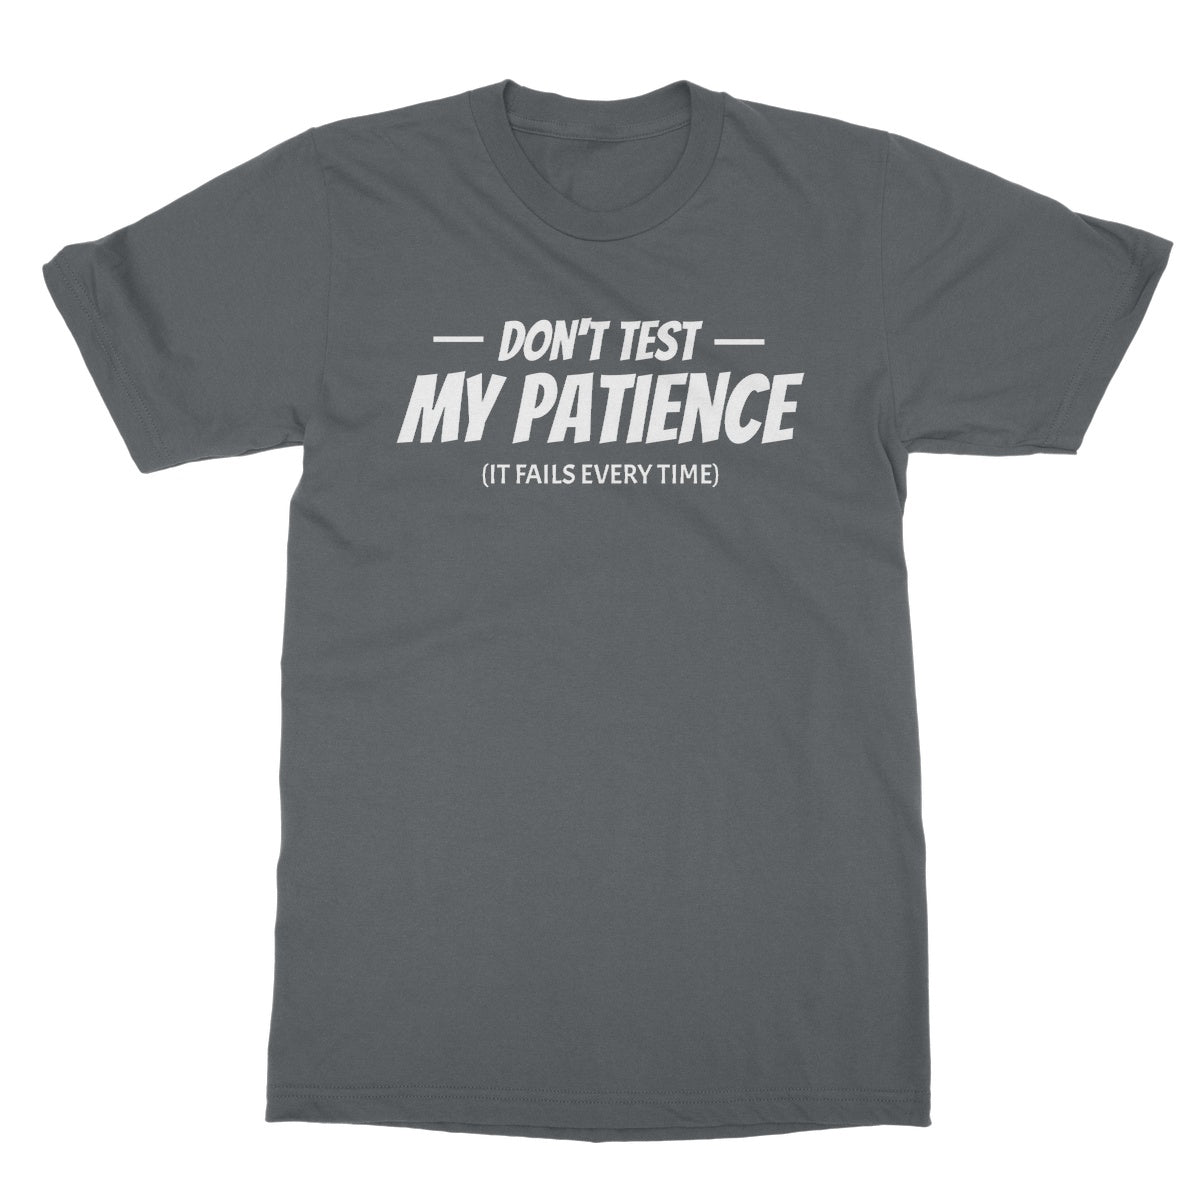 do not test my patience t shirt grey